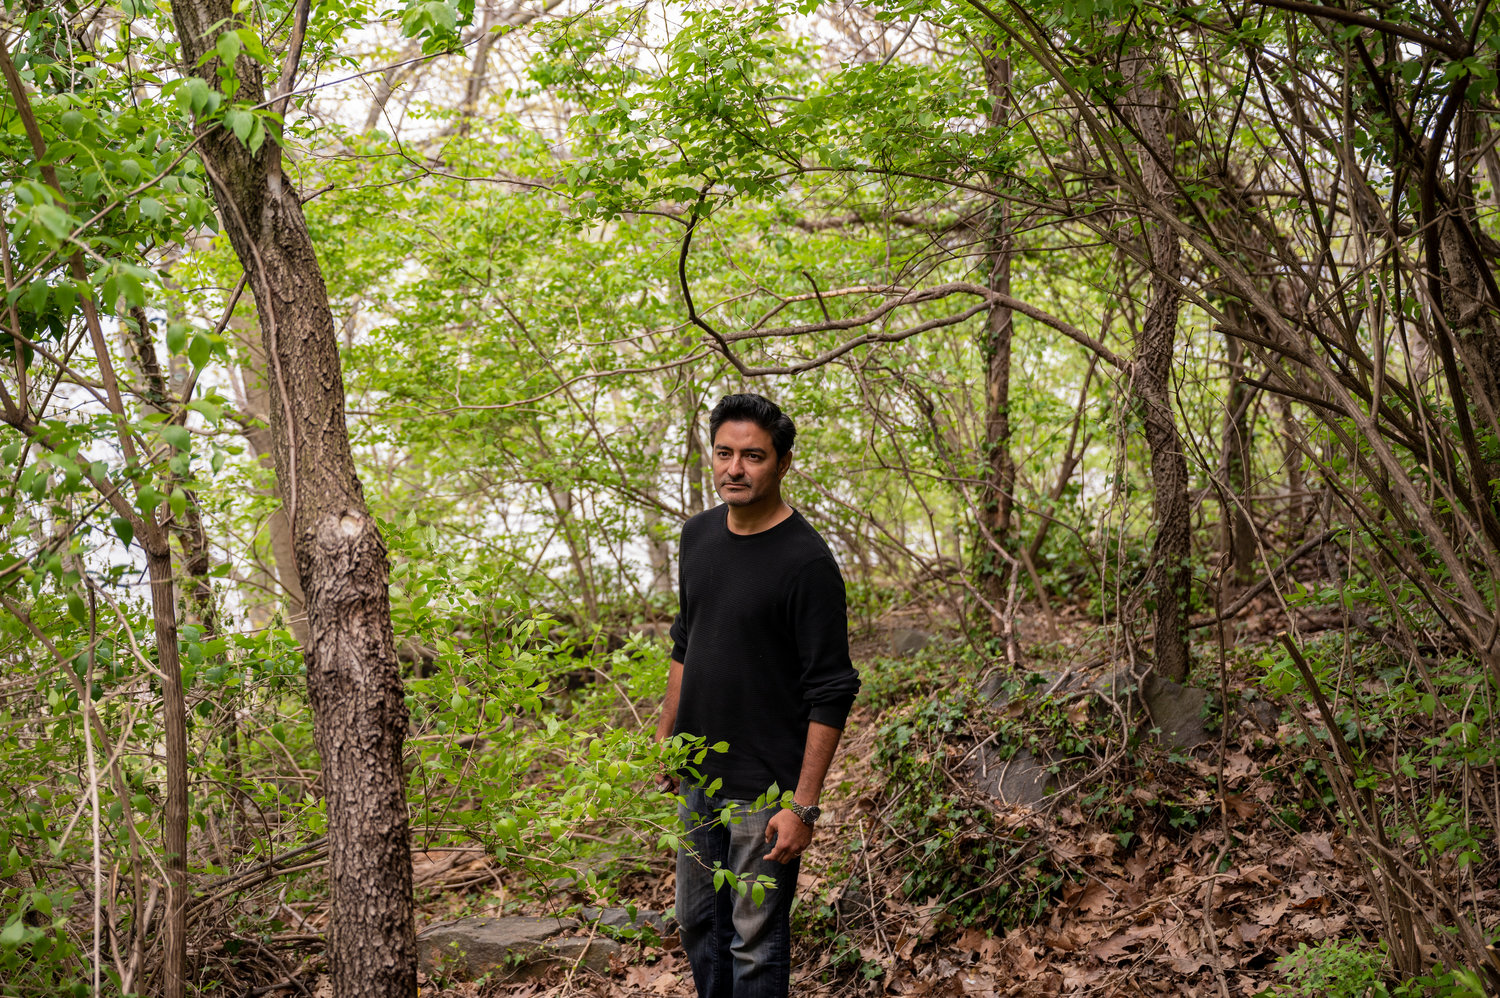 Looking for a hobby during the coronavirus pandemic, Victor San Andrés started landscaping a part of the Half-Moon Overlook park near his Spuyten Duyvil home. Four months later, San Andrés says he cleared and cleaned the space — transforming it into what he calls the ‘Halve Maan Garden.’